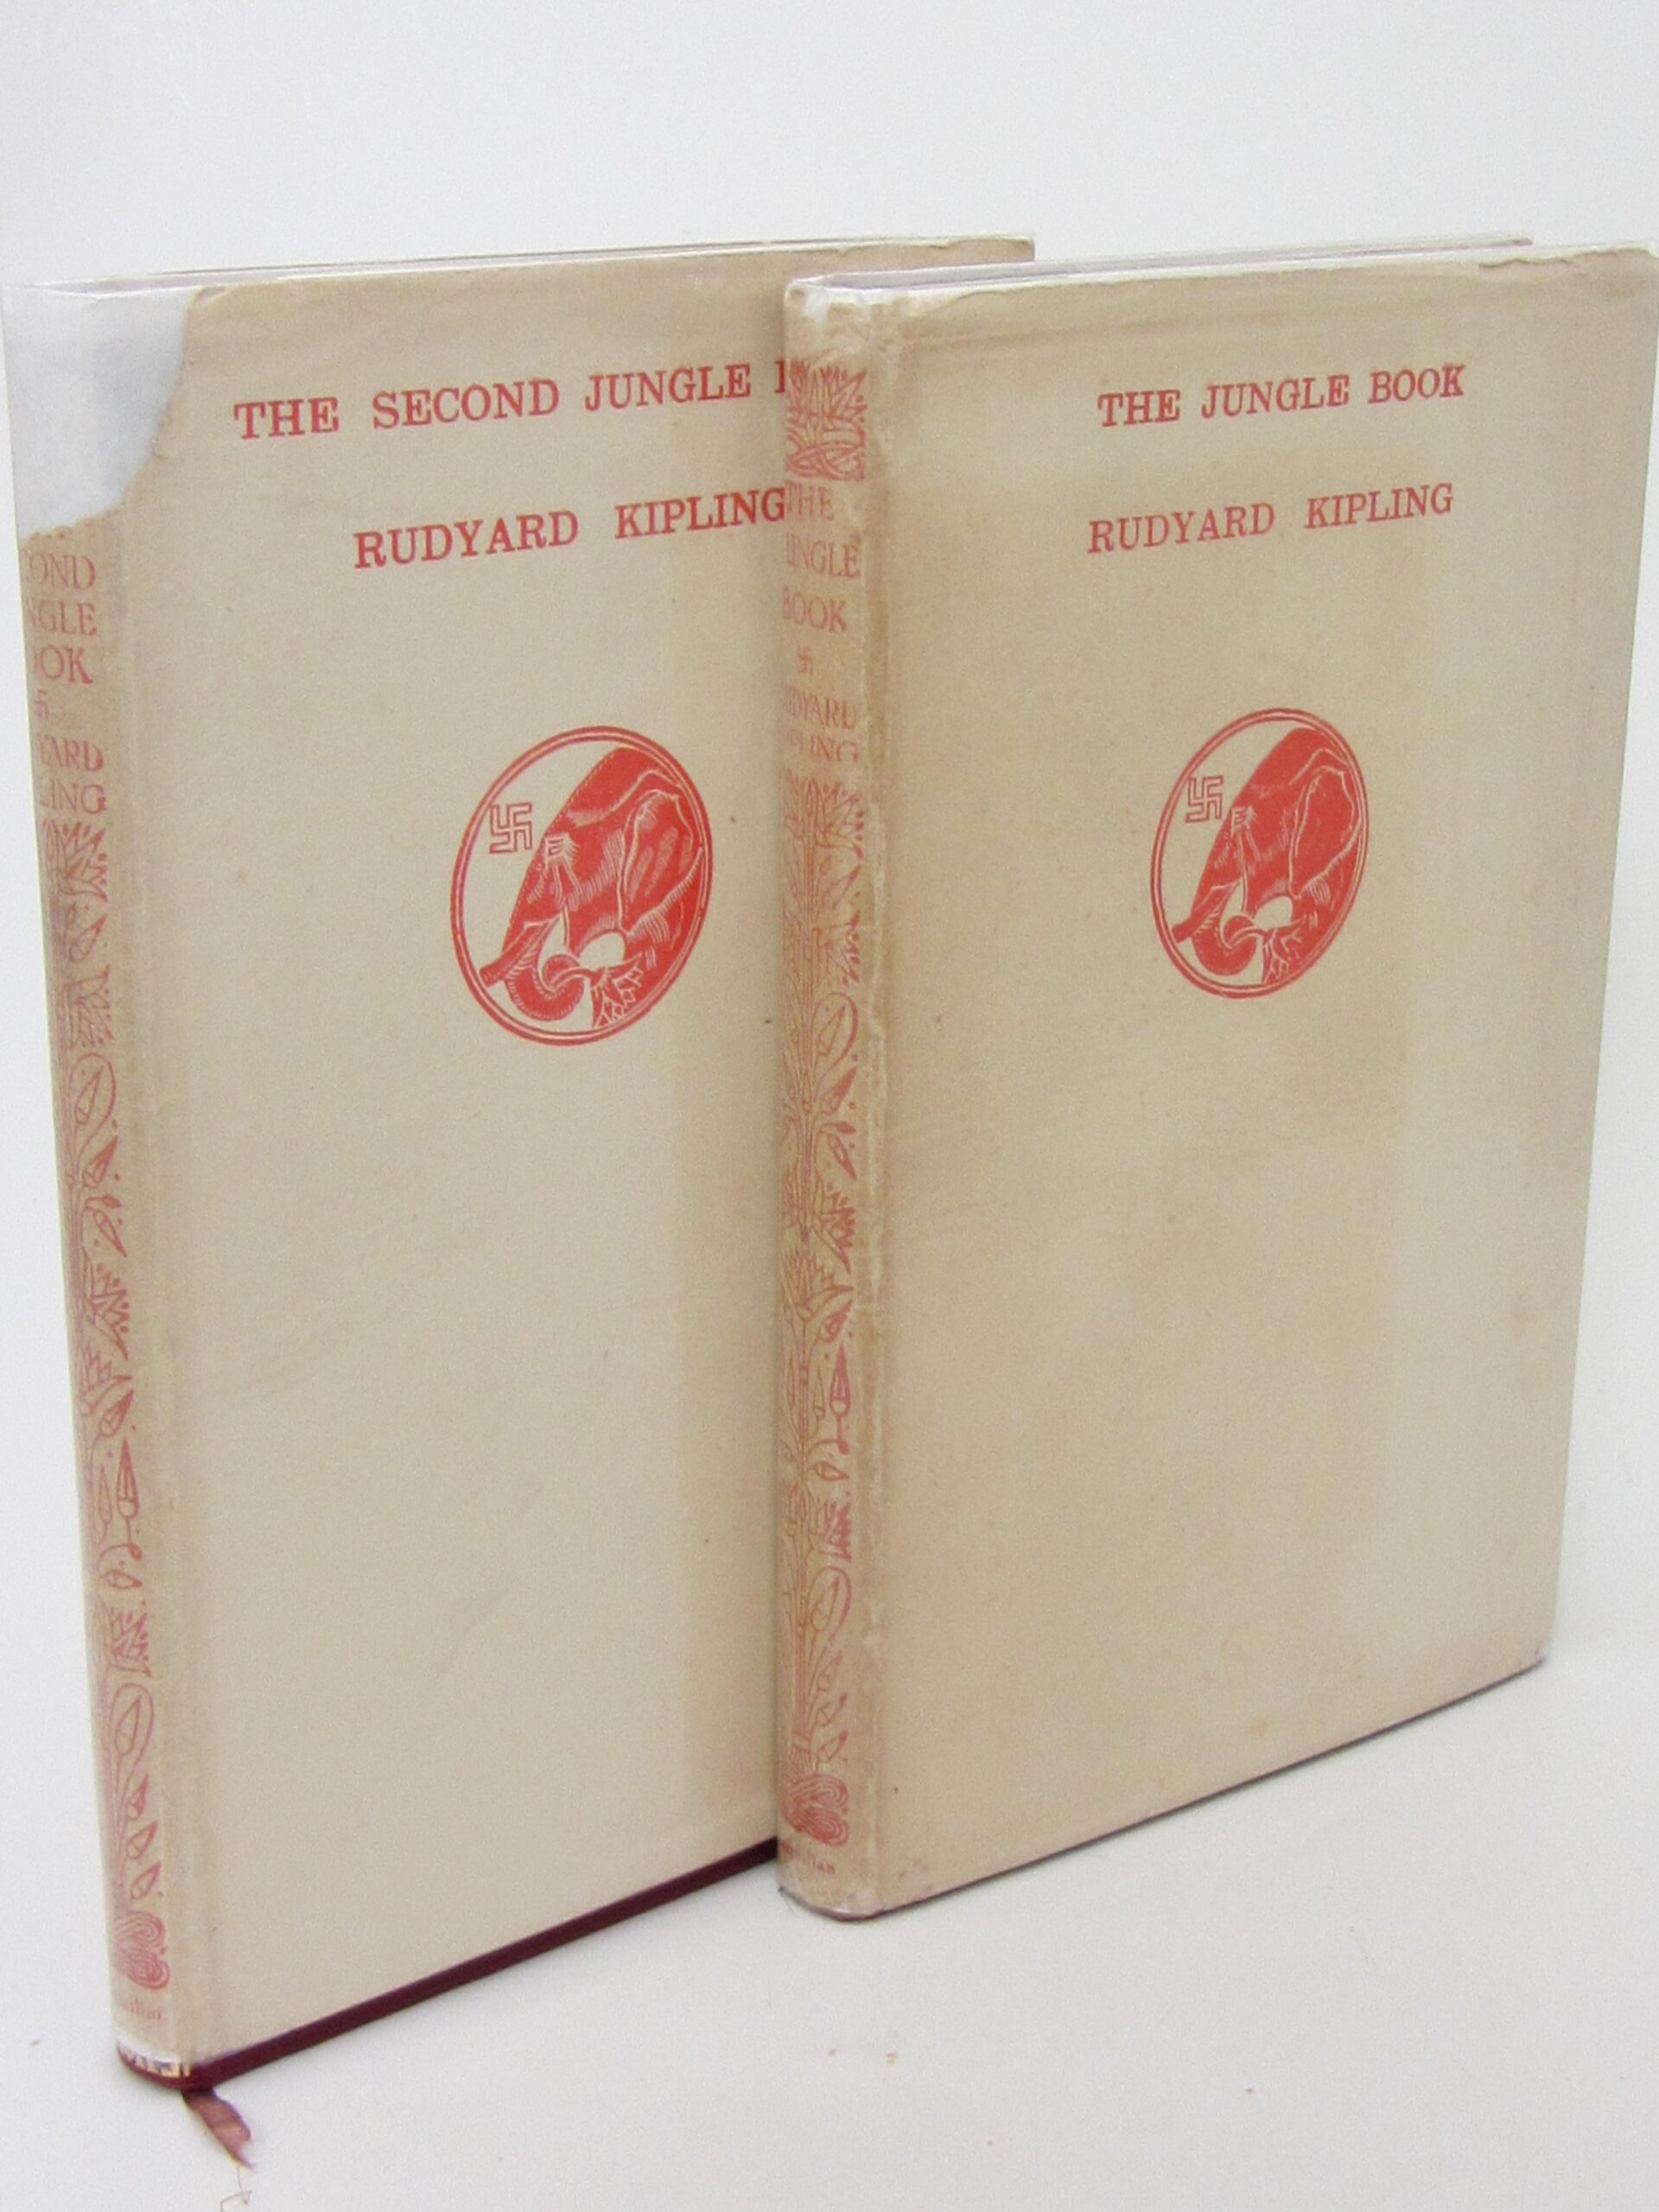 The Jungle Book & The Second Jungle Book (1924) by Rudyard Kipling